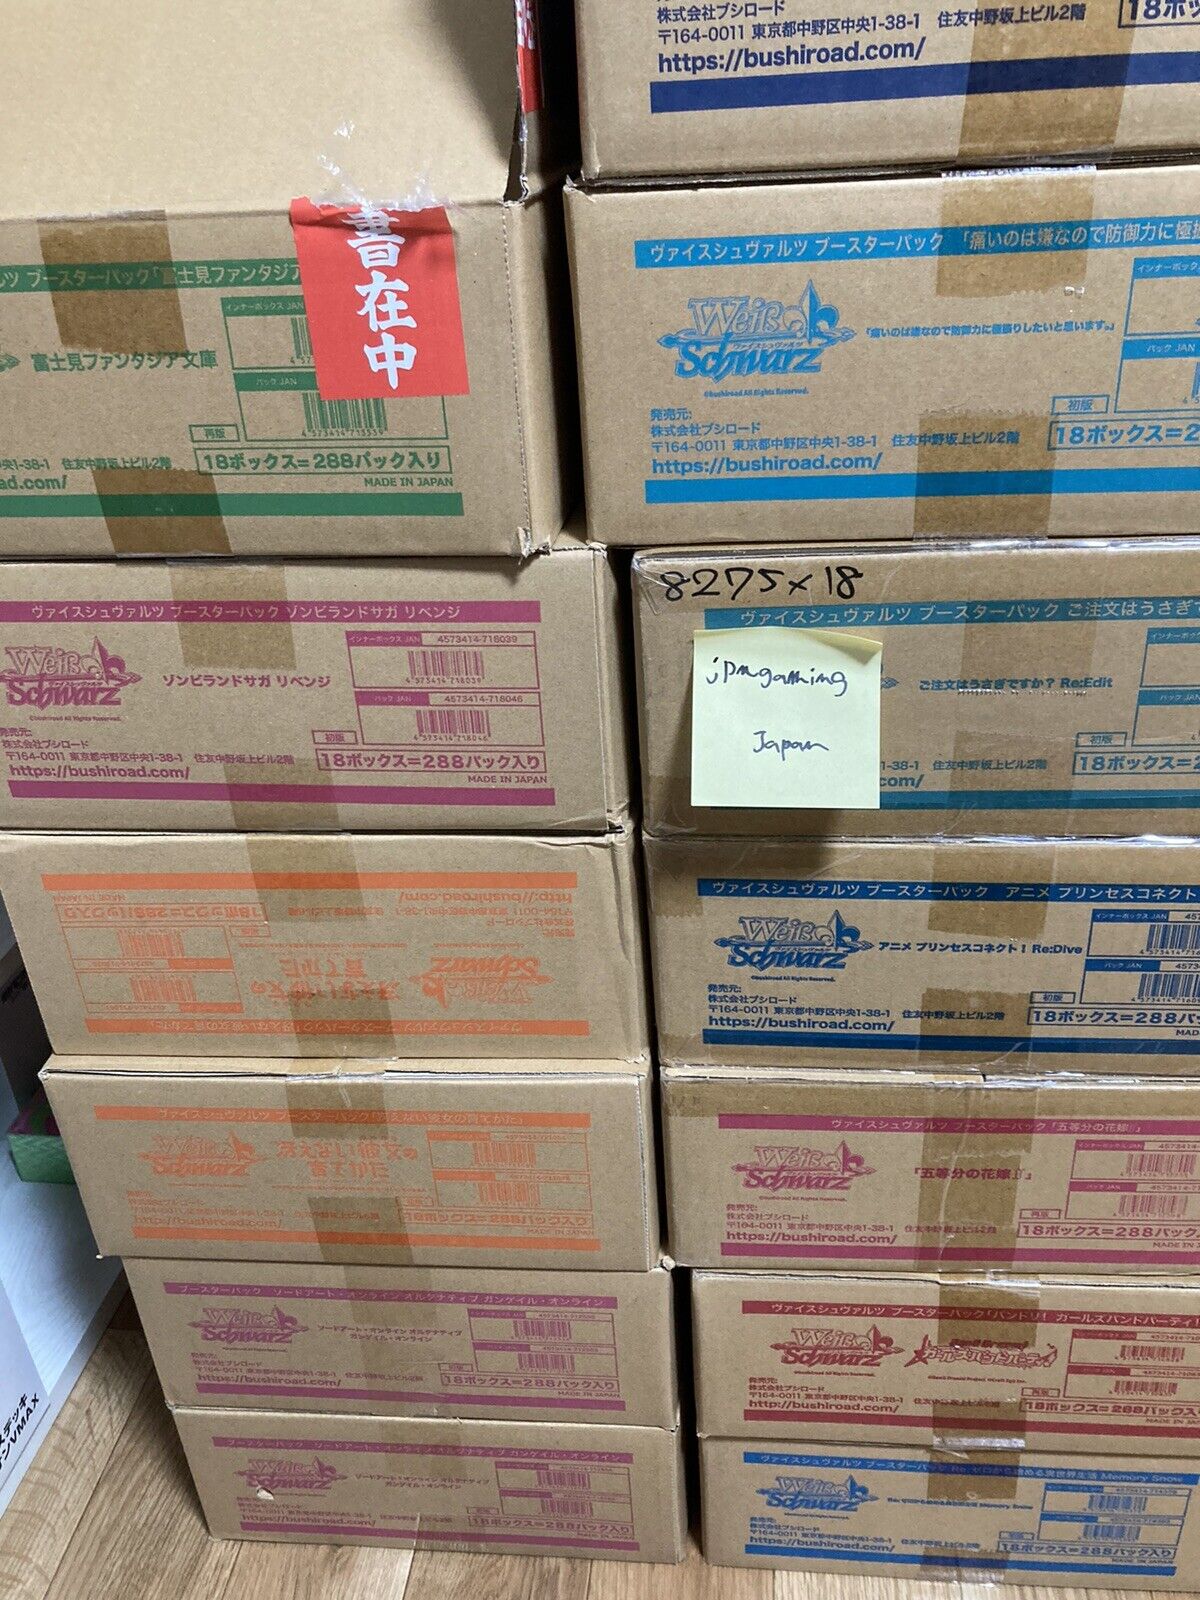 Master Case(54 Boxes) Come Back Weiss Schwarz STAR WARS Japanese Free Shipping